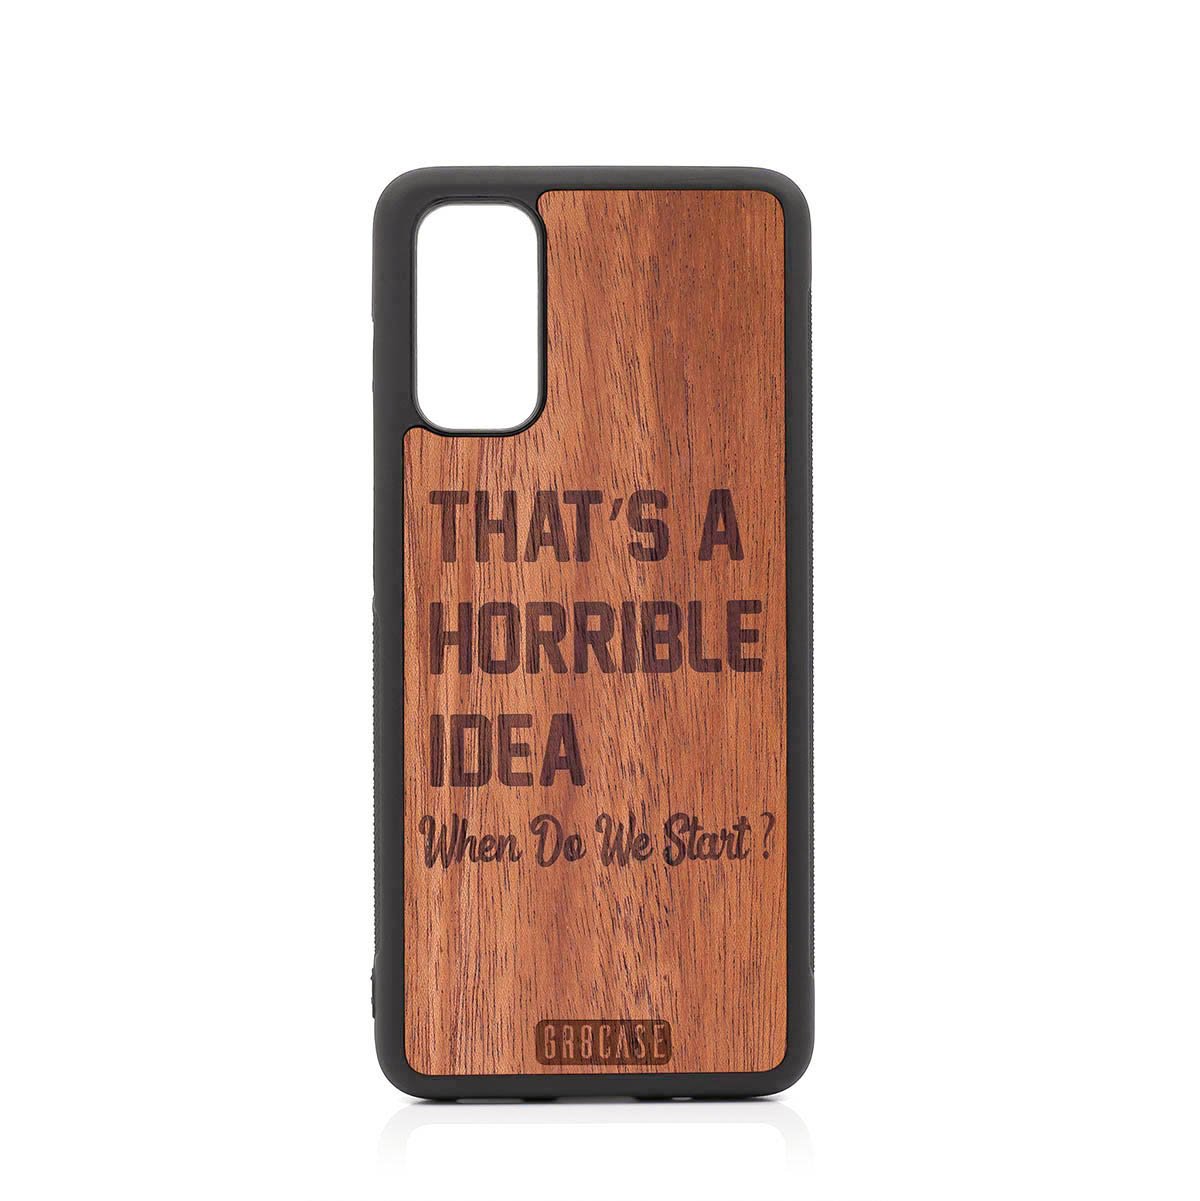 That's A Horrible Idea When Do We Start? Design Wood Case For Samsung Galaxy S20 FE 5G